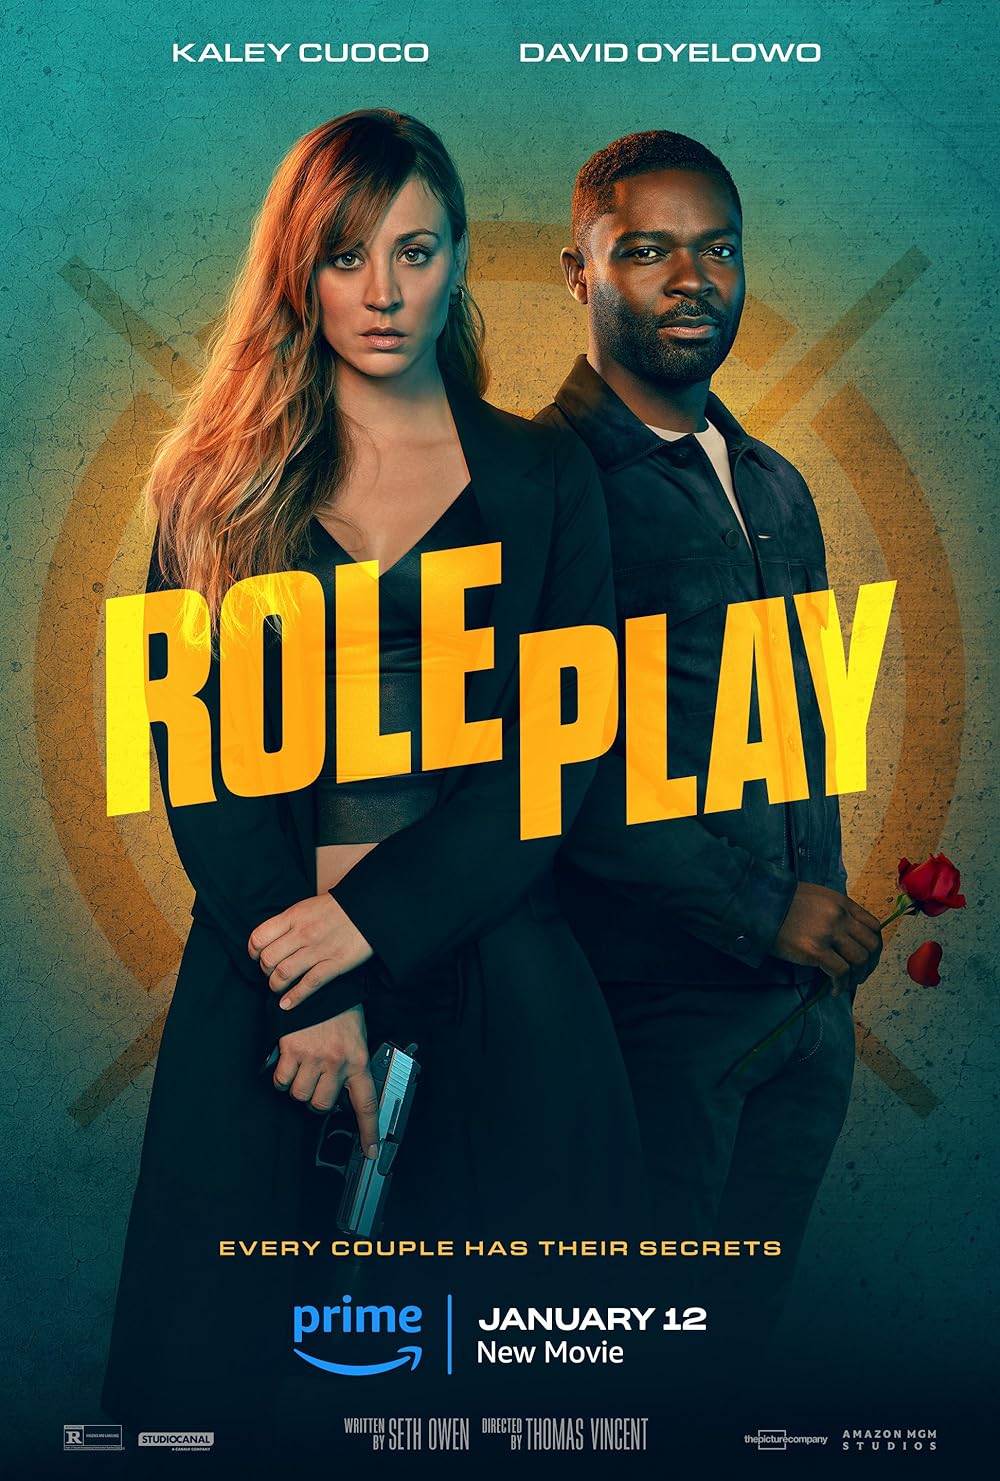 Role Play (January 12) - Streaming on Prime Video
In 'Role Play,' Kaley Cuoco stars as Emma, a suburban New Jersey resident with a seemingly perfect life, including a loving husband, played by David Oyelowo. However, beneath this ordinary front, Emma leads a clandestine existence as a hired assassin. The plot takes a turn when David unwittingly uncovers her secret during an attempt to add excitement to their marriage through role-playing.